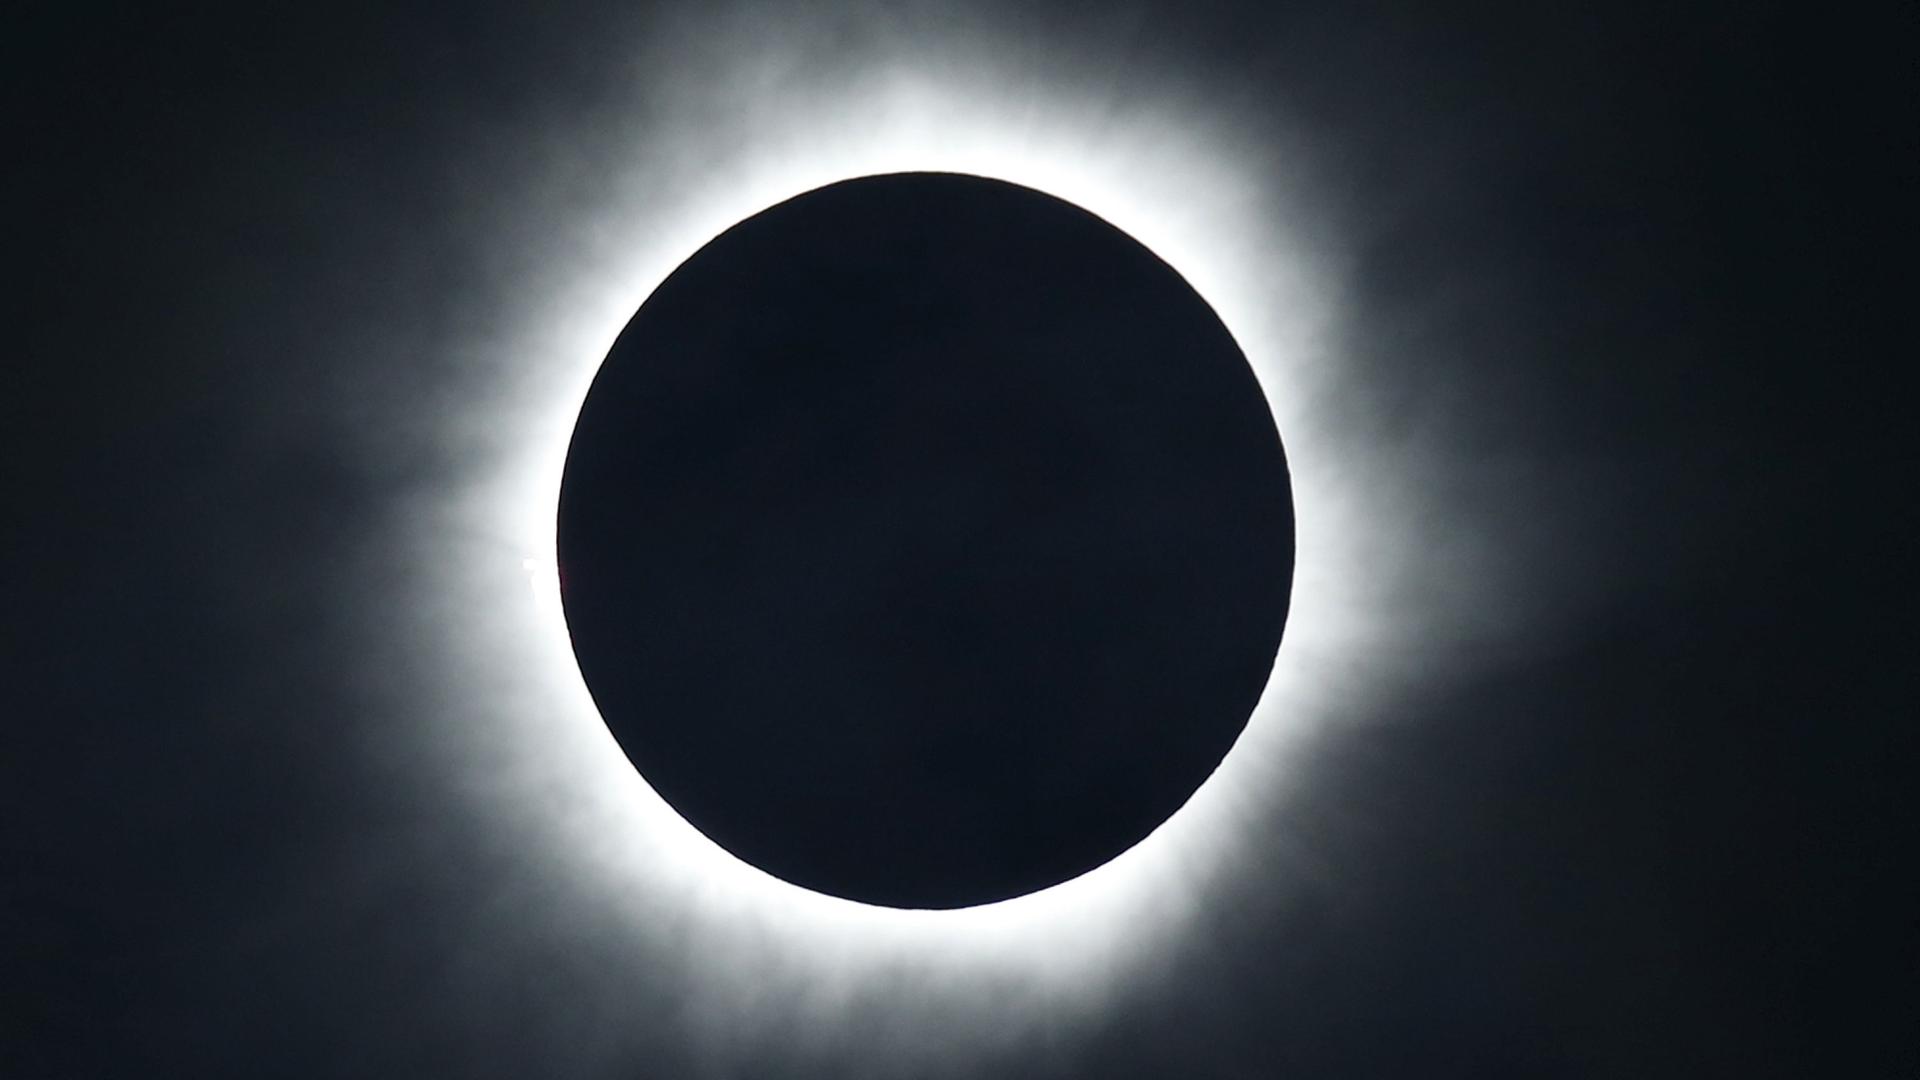 The sun is blacked out and surrounded by a ring of bright light during a total solar eclipse.